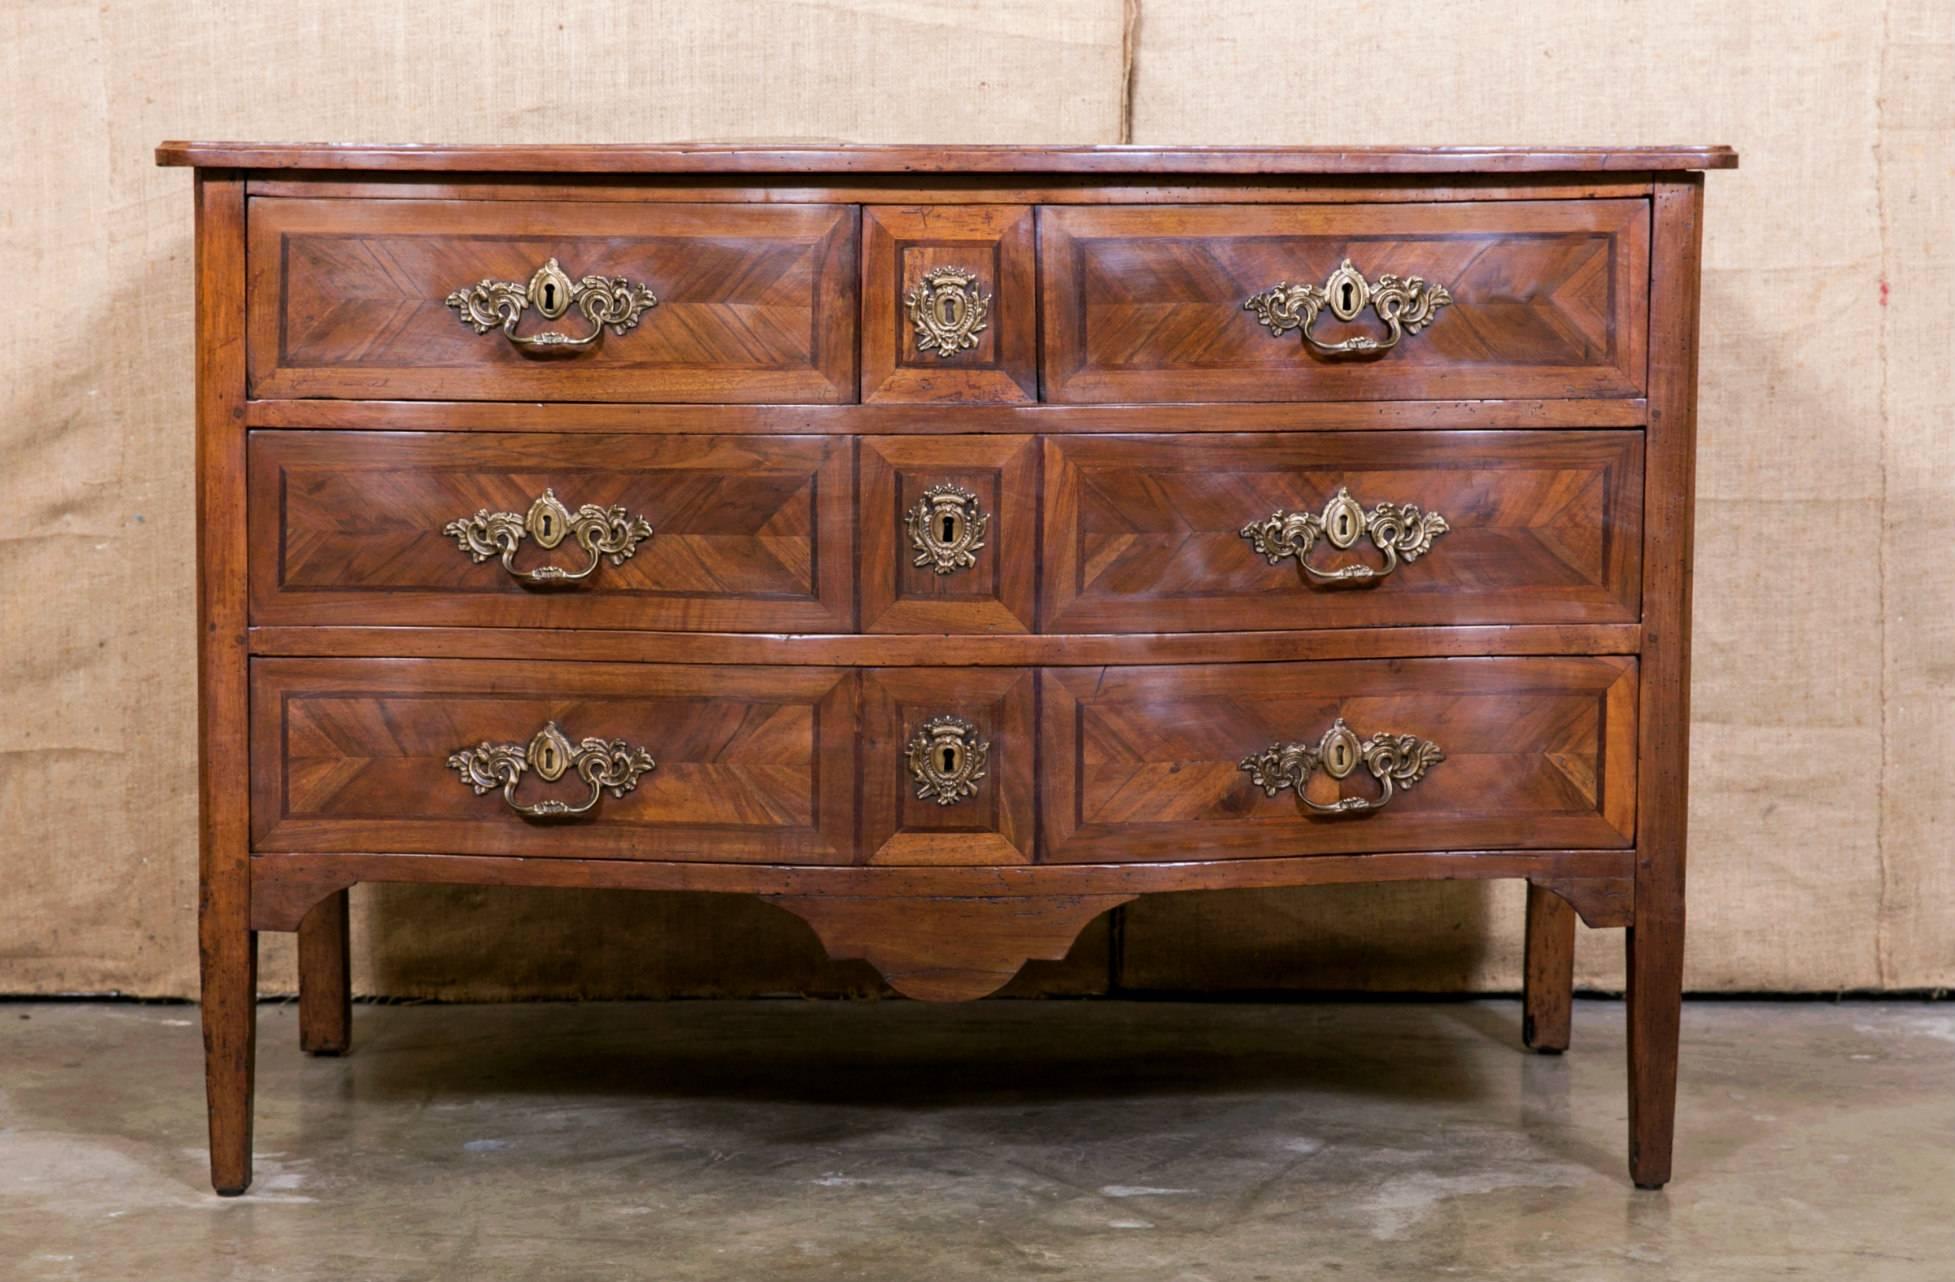 A fine late 18th century Louis XVI period parquetry commode from the Lyon region, having a serpentine front with four drawers adorned with original bronze hardware. Raised on tapered legs.

The beauty is in the refinement of the details of this